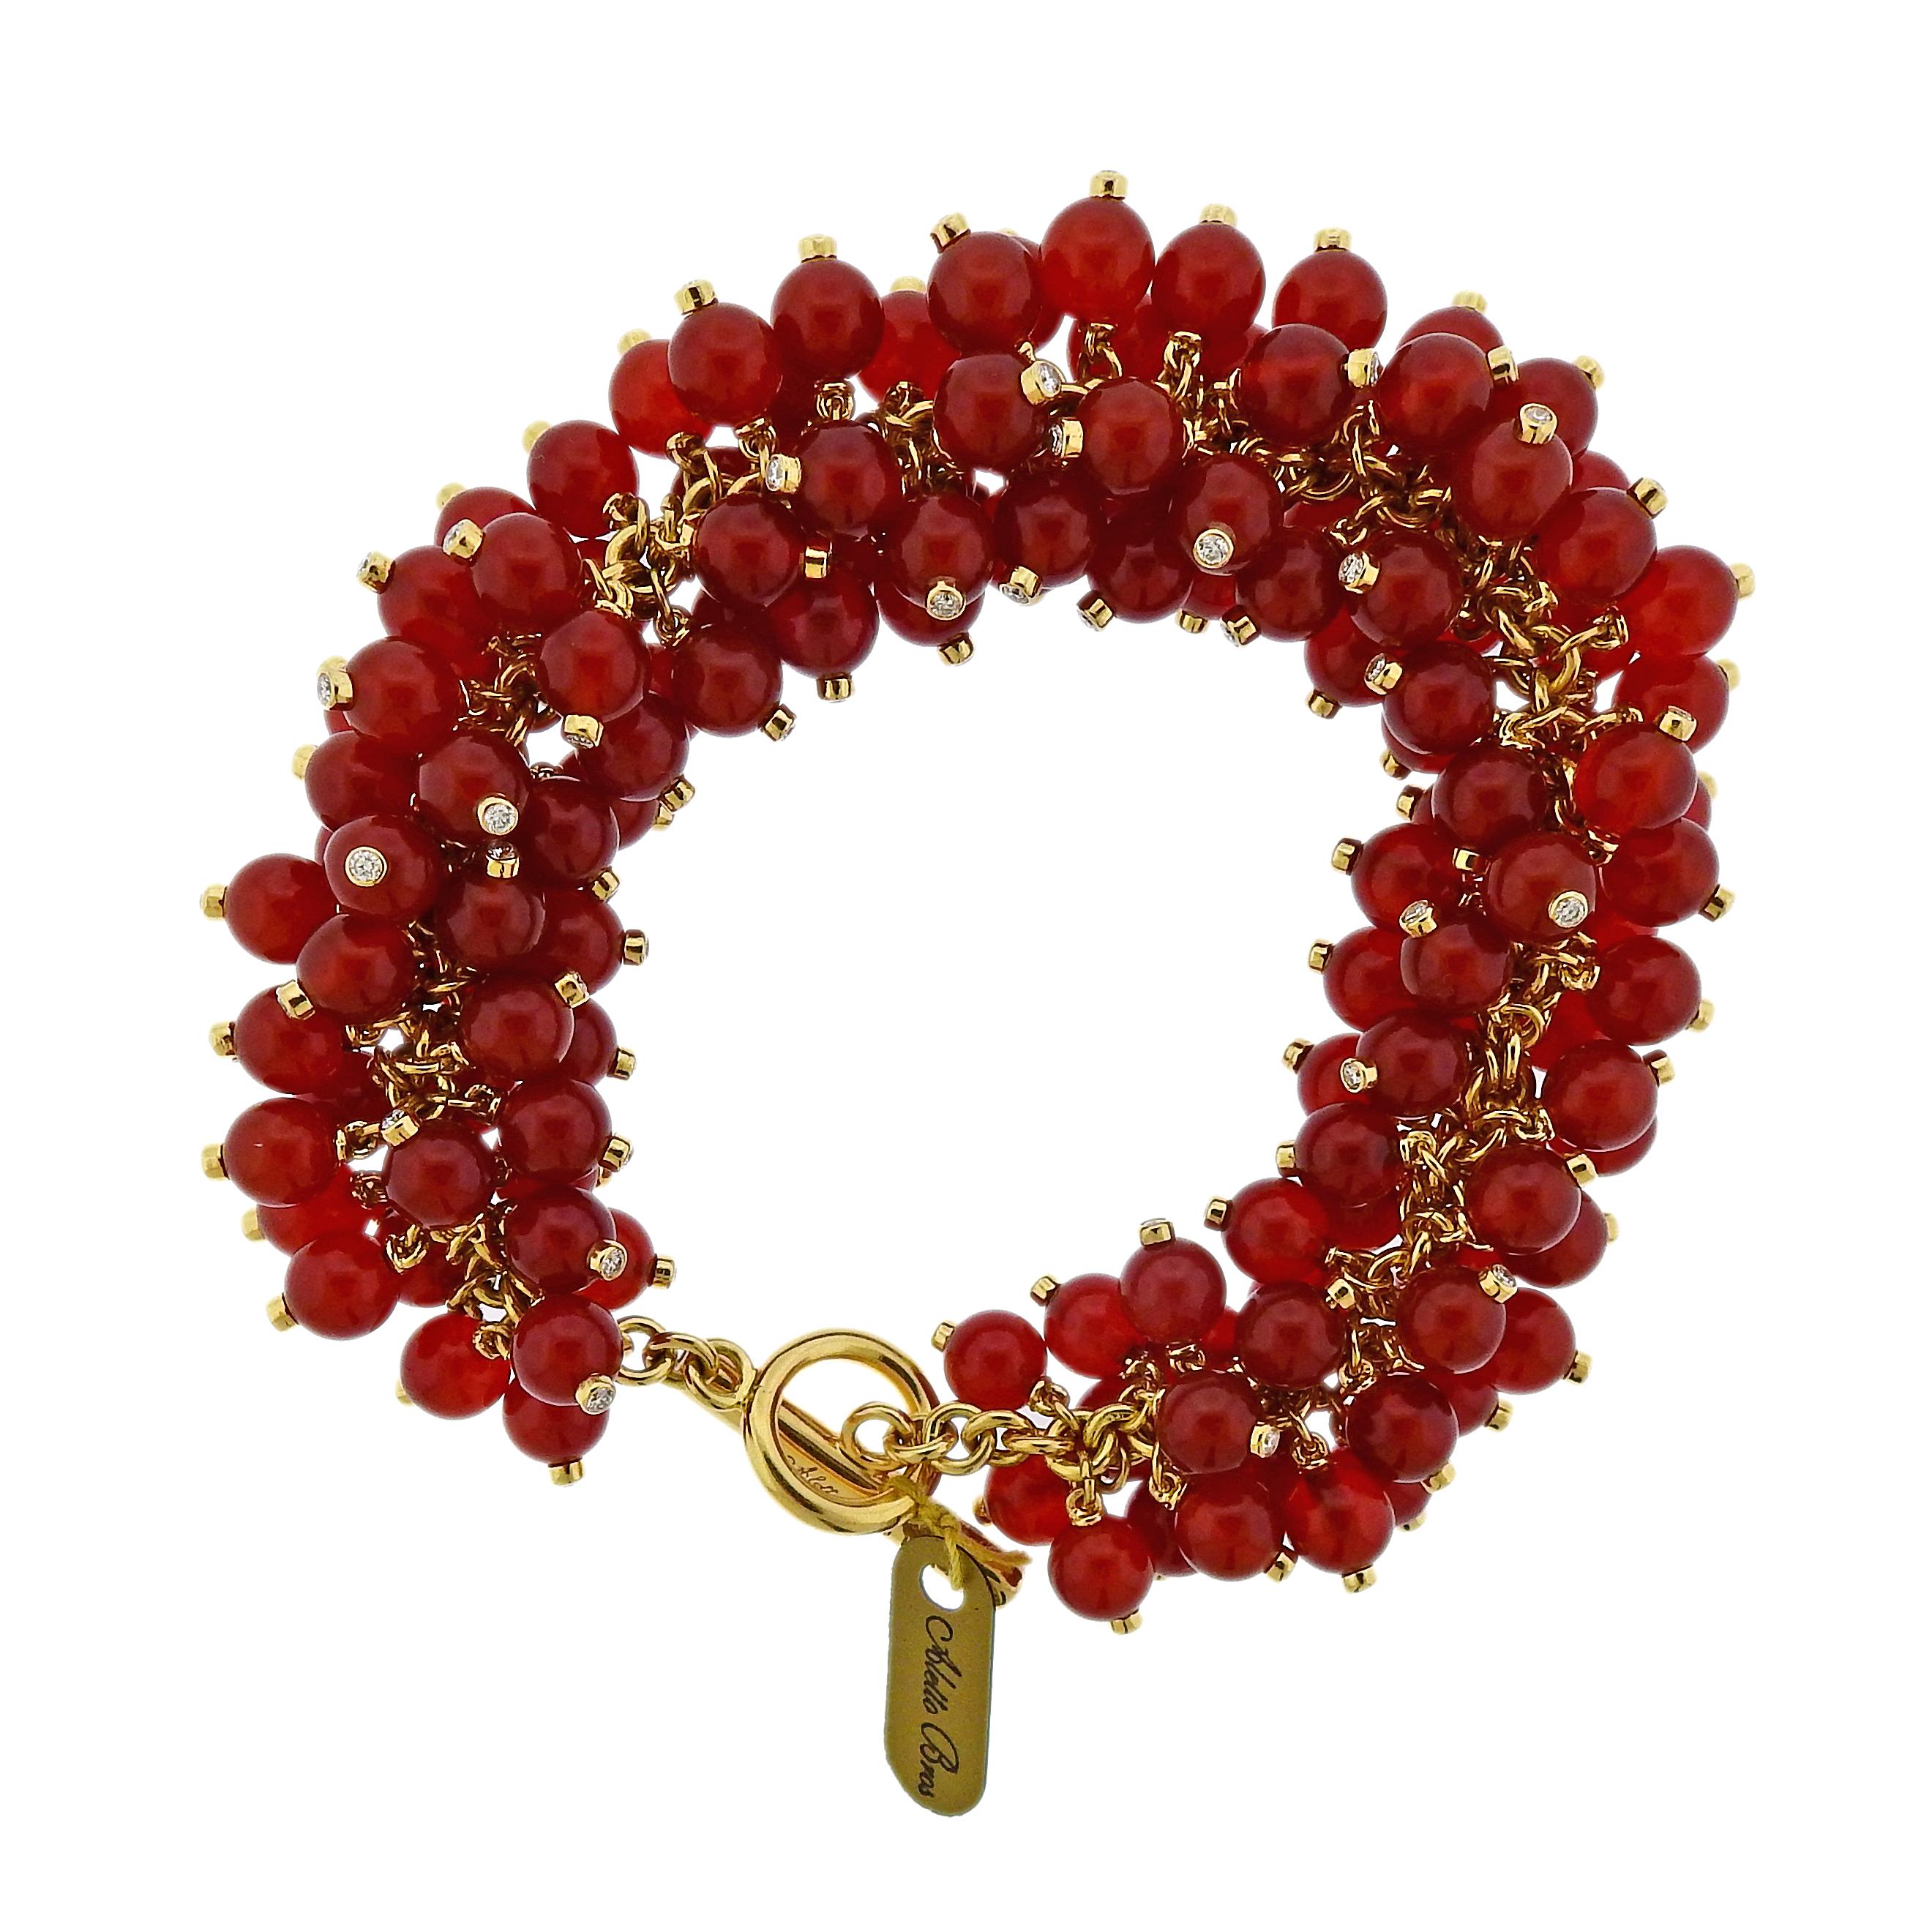 New 18k yellow gold toggle bracelet, featuring carnelian and diamond beads, crafted by Aletto Brothers. Set with 3.26ctw in VVS-VS/G diamonds. Bracelet is 8